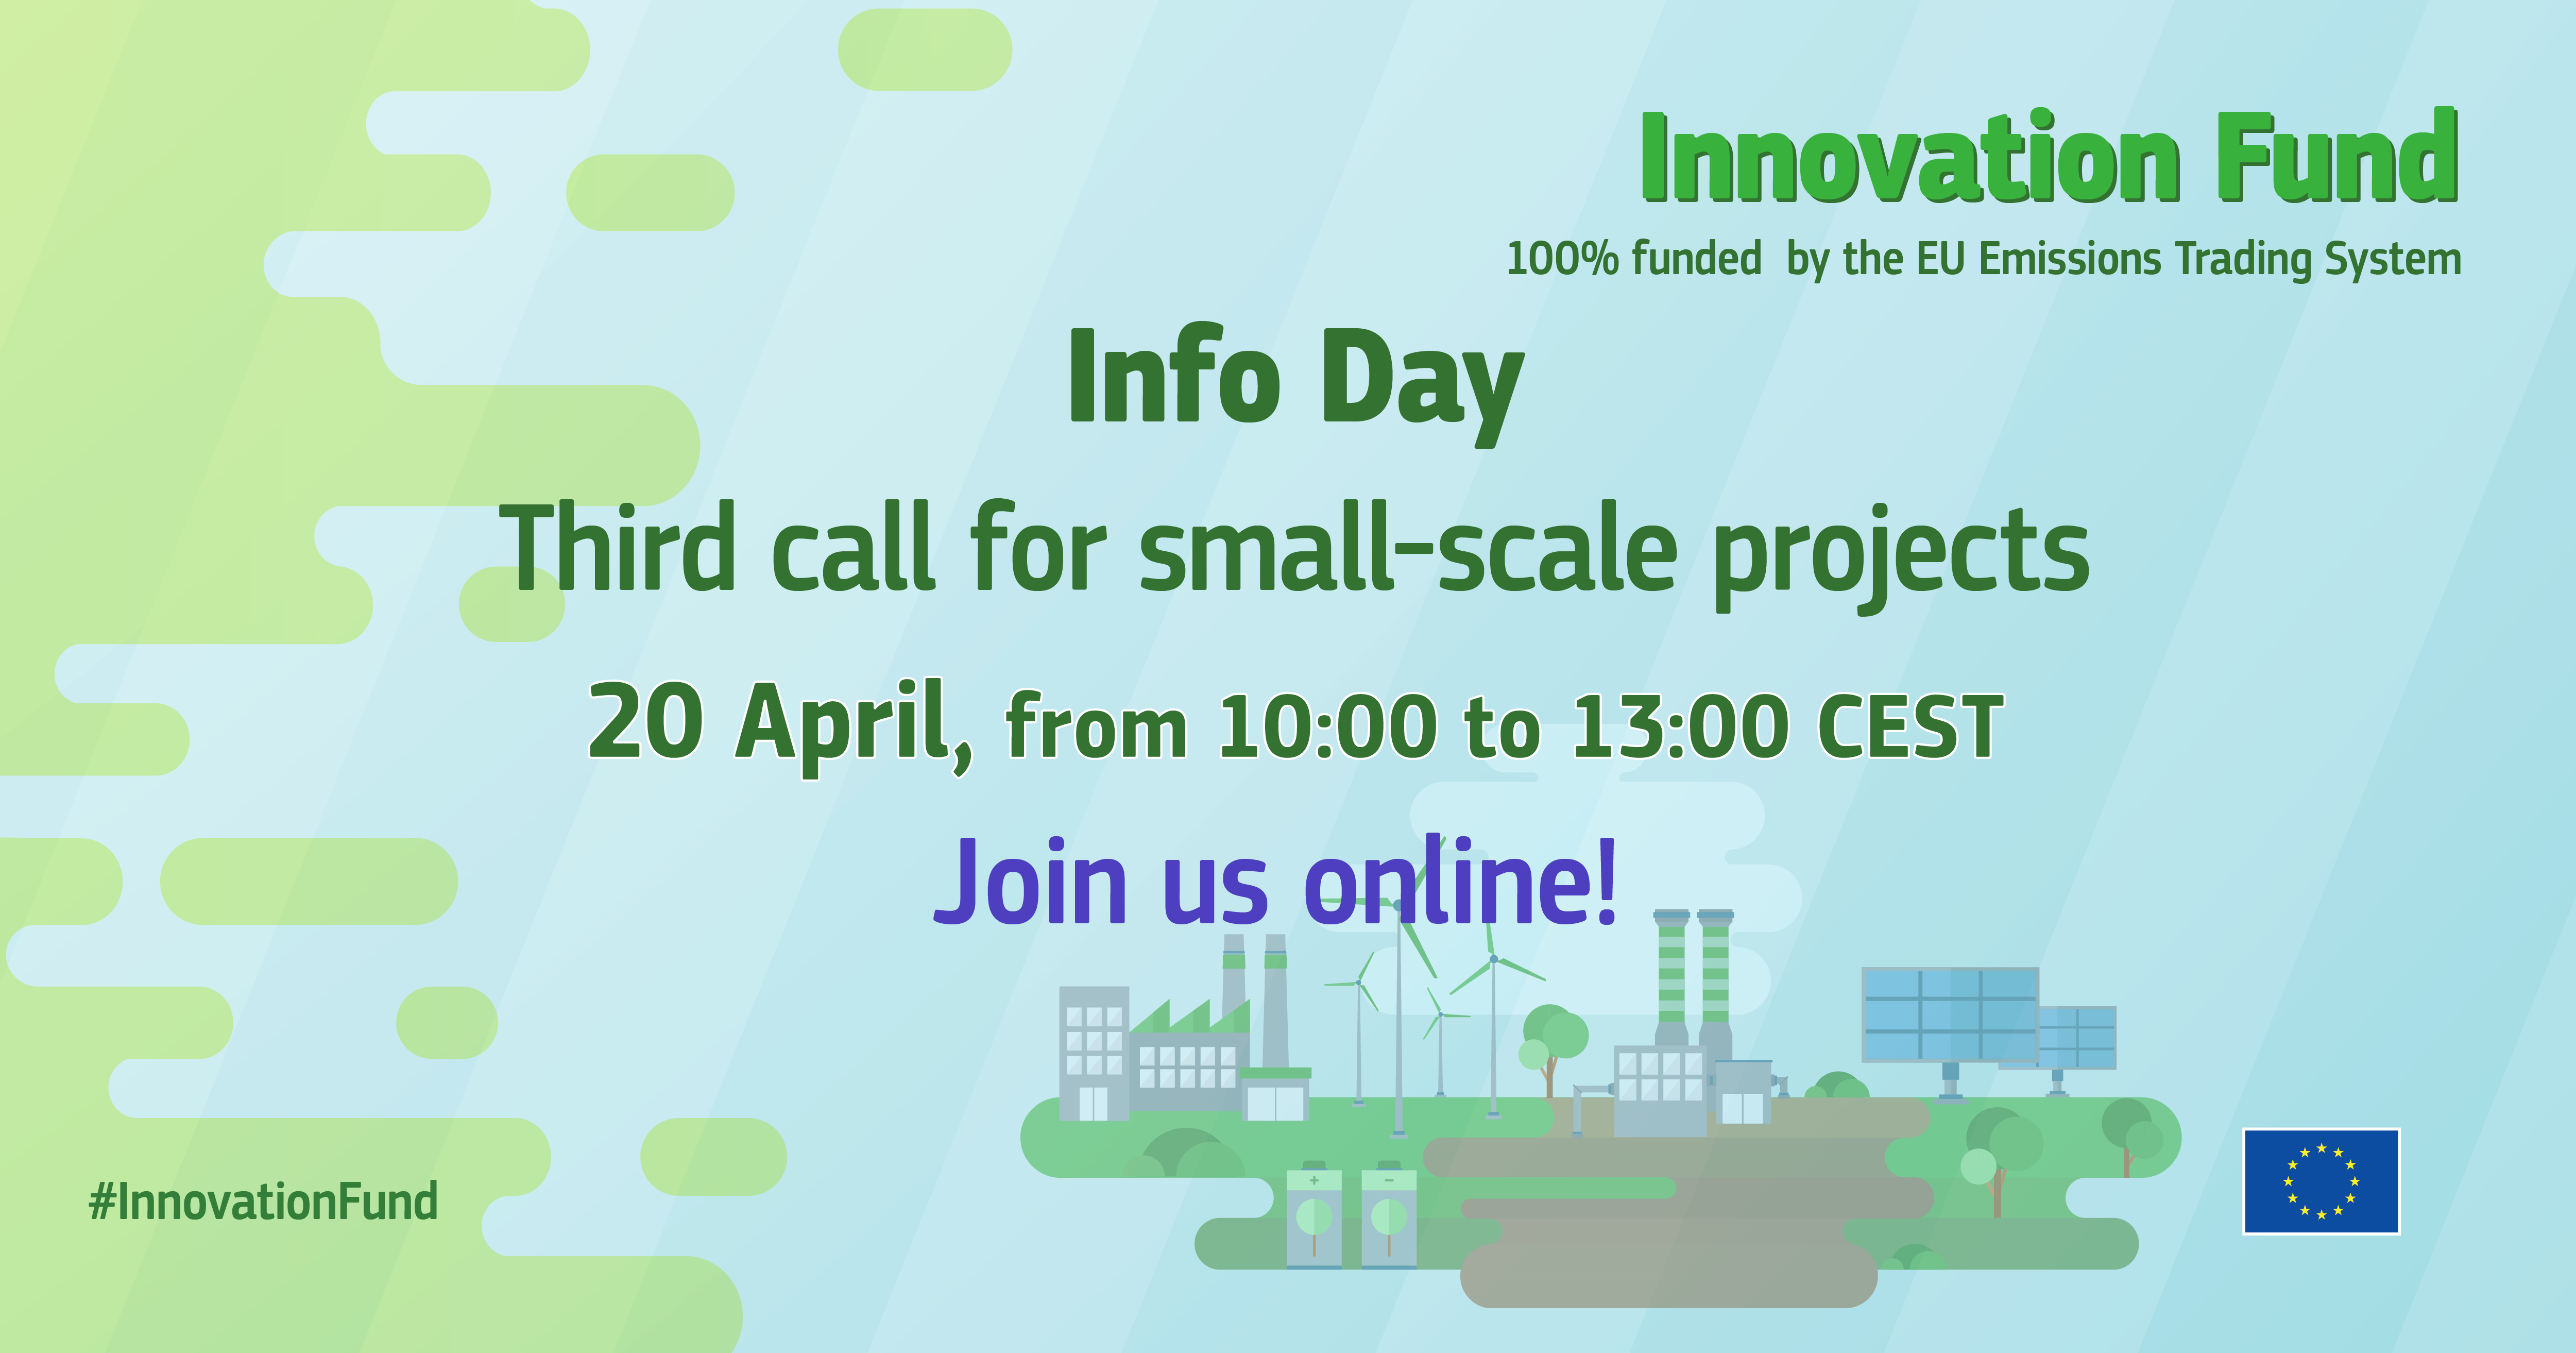 Innovation Fund - Info Day Third cal for small-scale projects